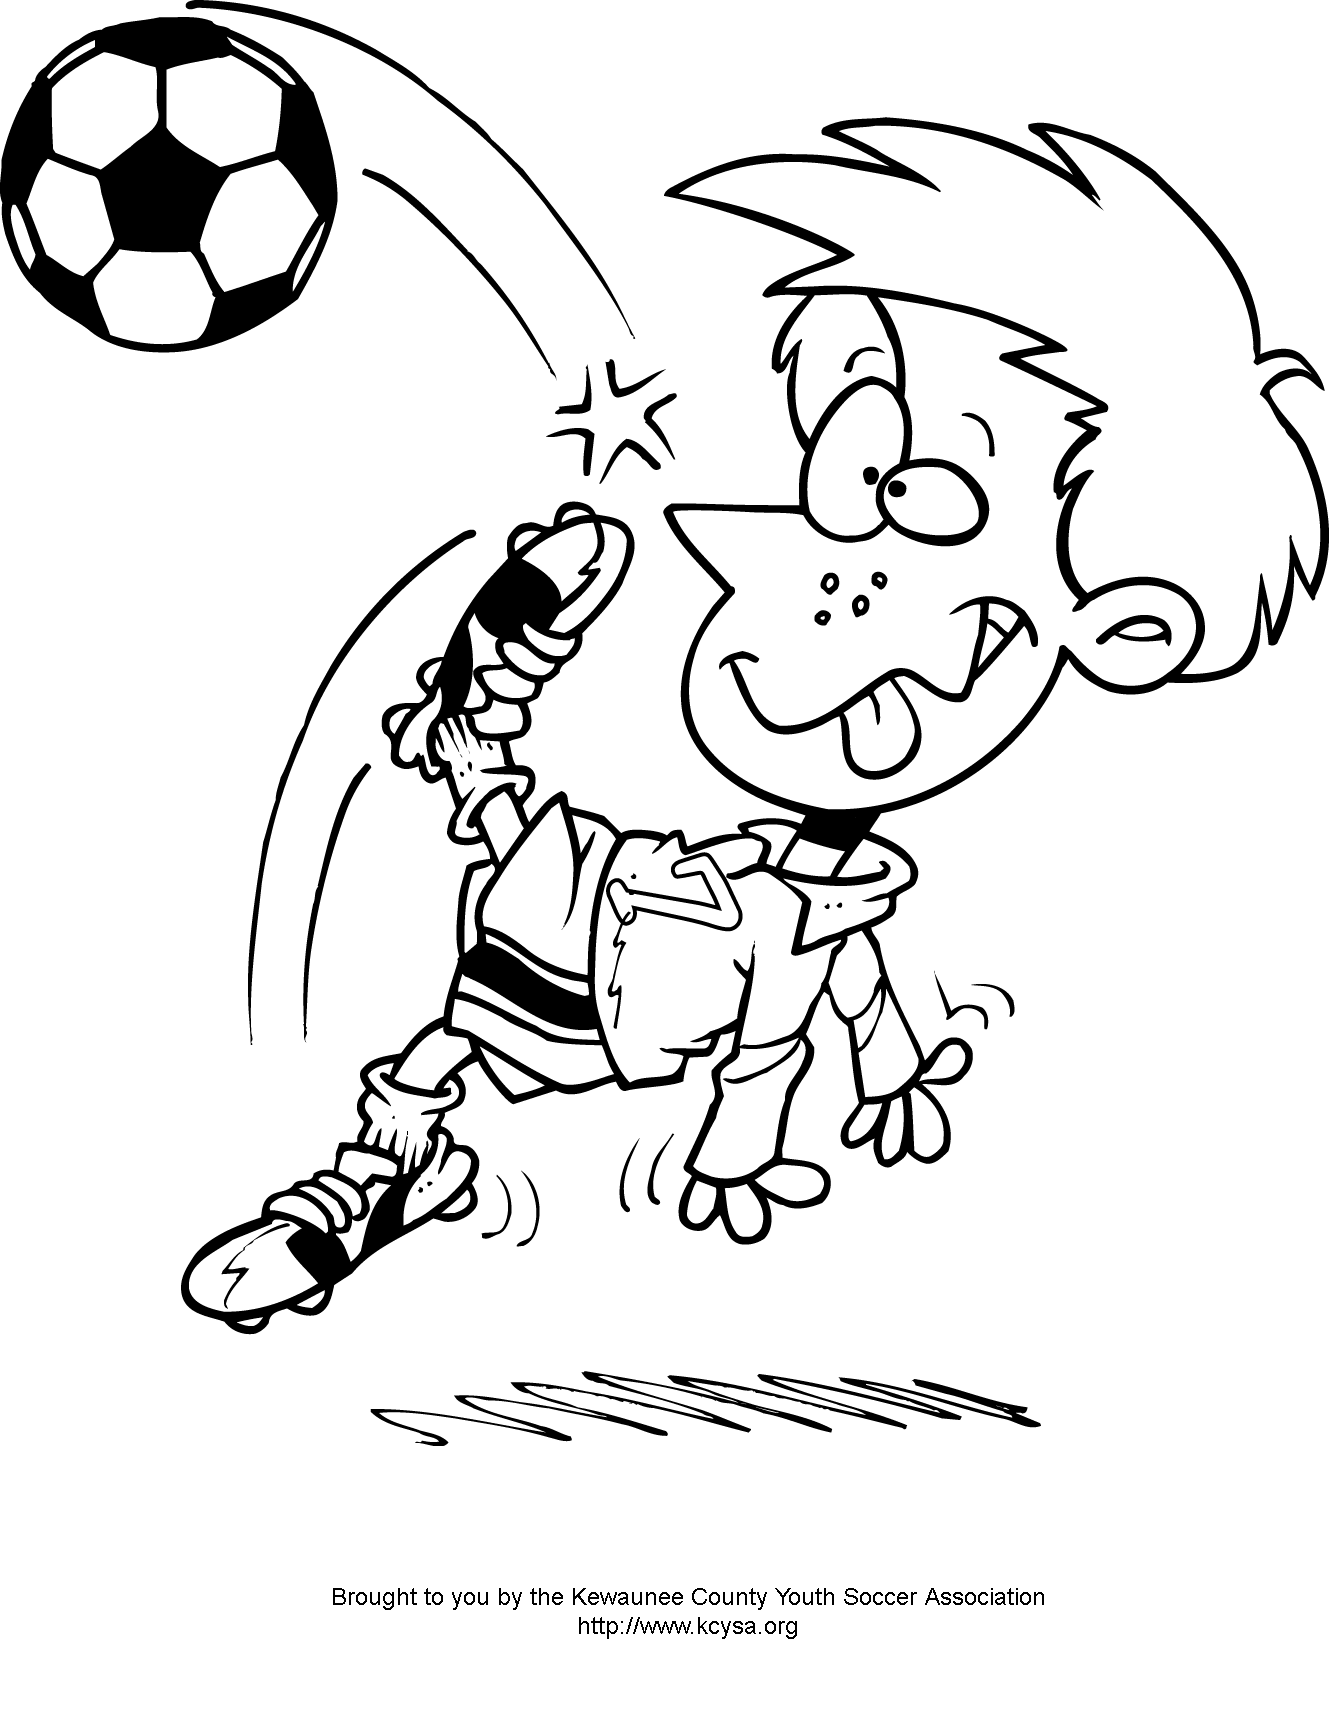 Soccer coloring pages 11 / Soccer / Kids printables coloring pages